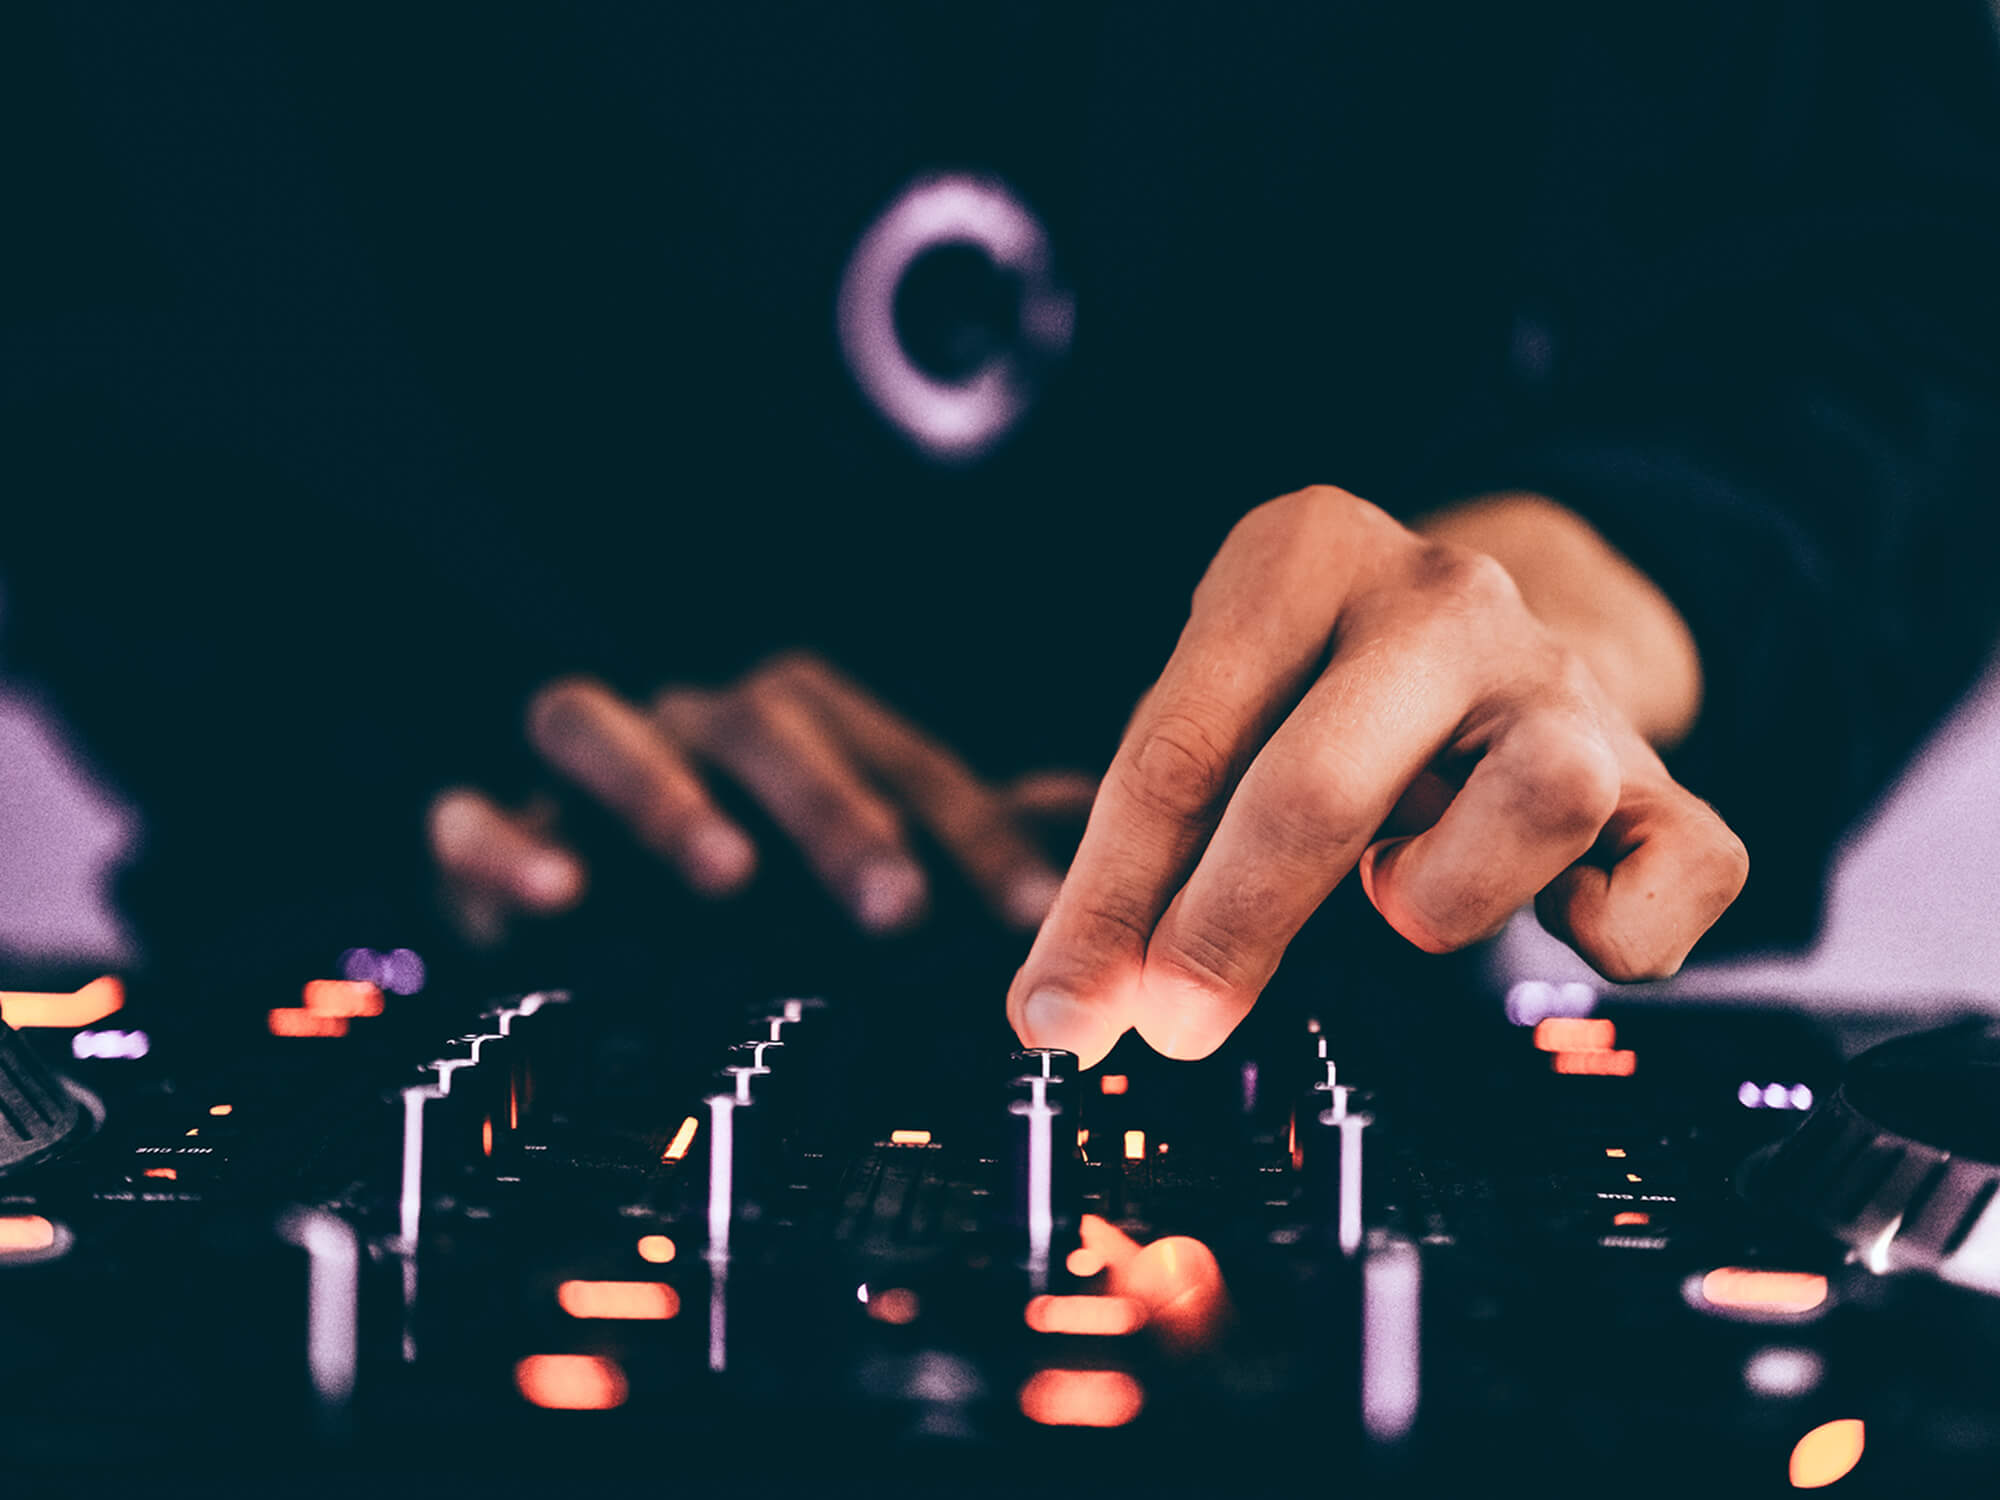 DJ using controller from Getty Images